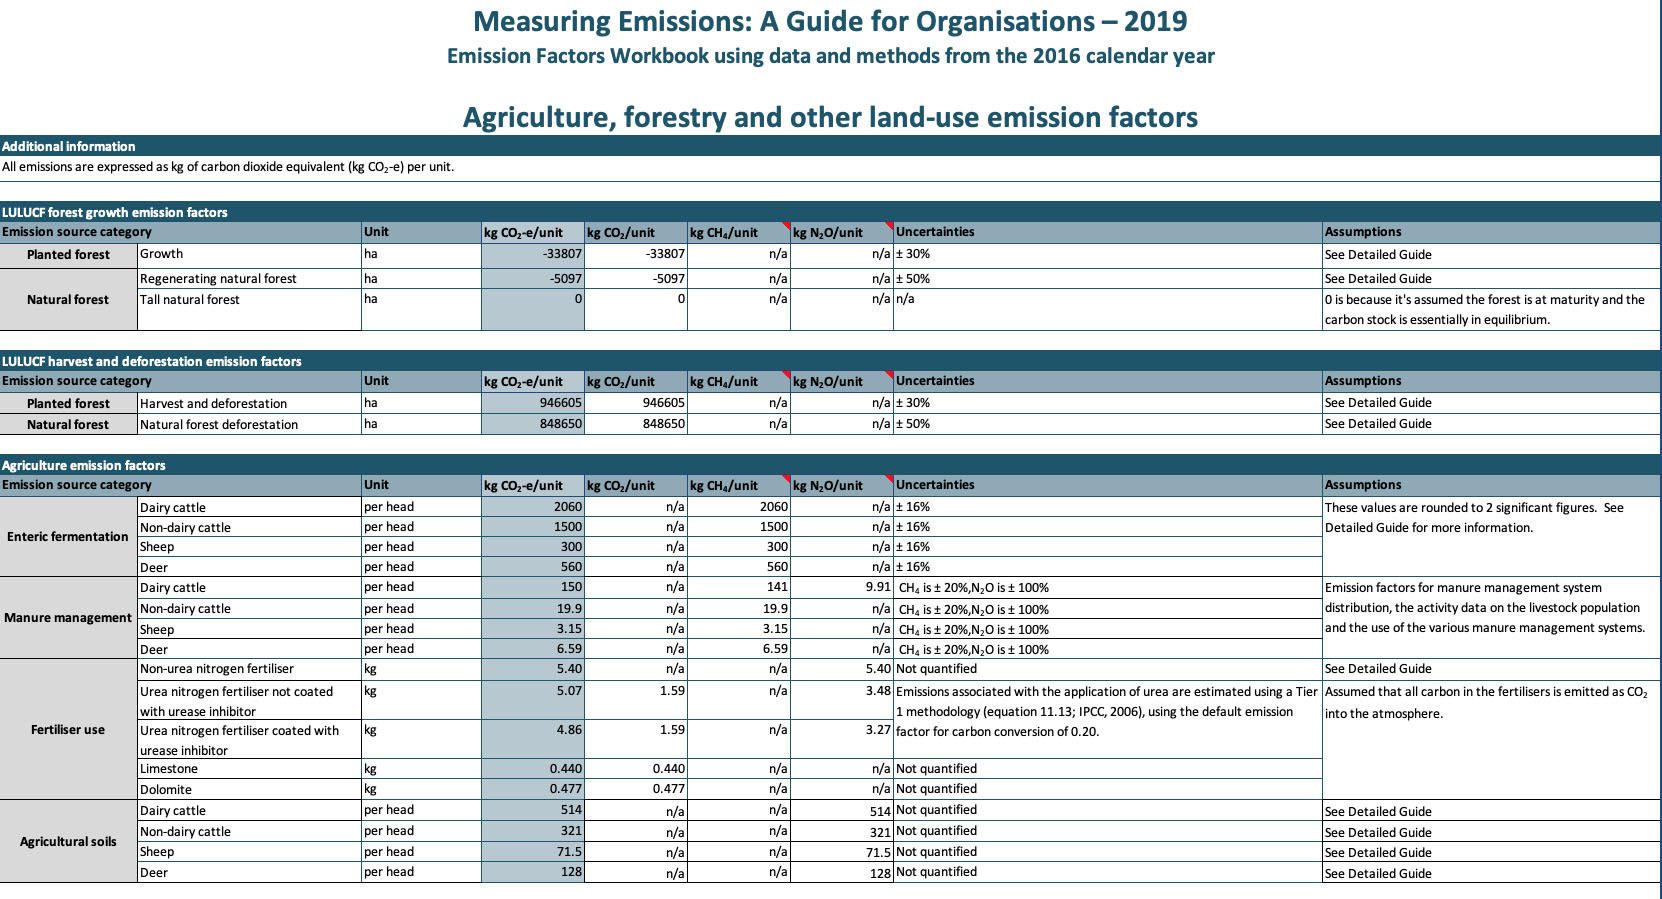 Table 1: From the MfE Emissions Factors Workbook 2019 xls file